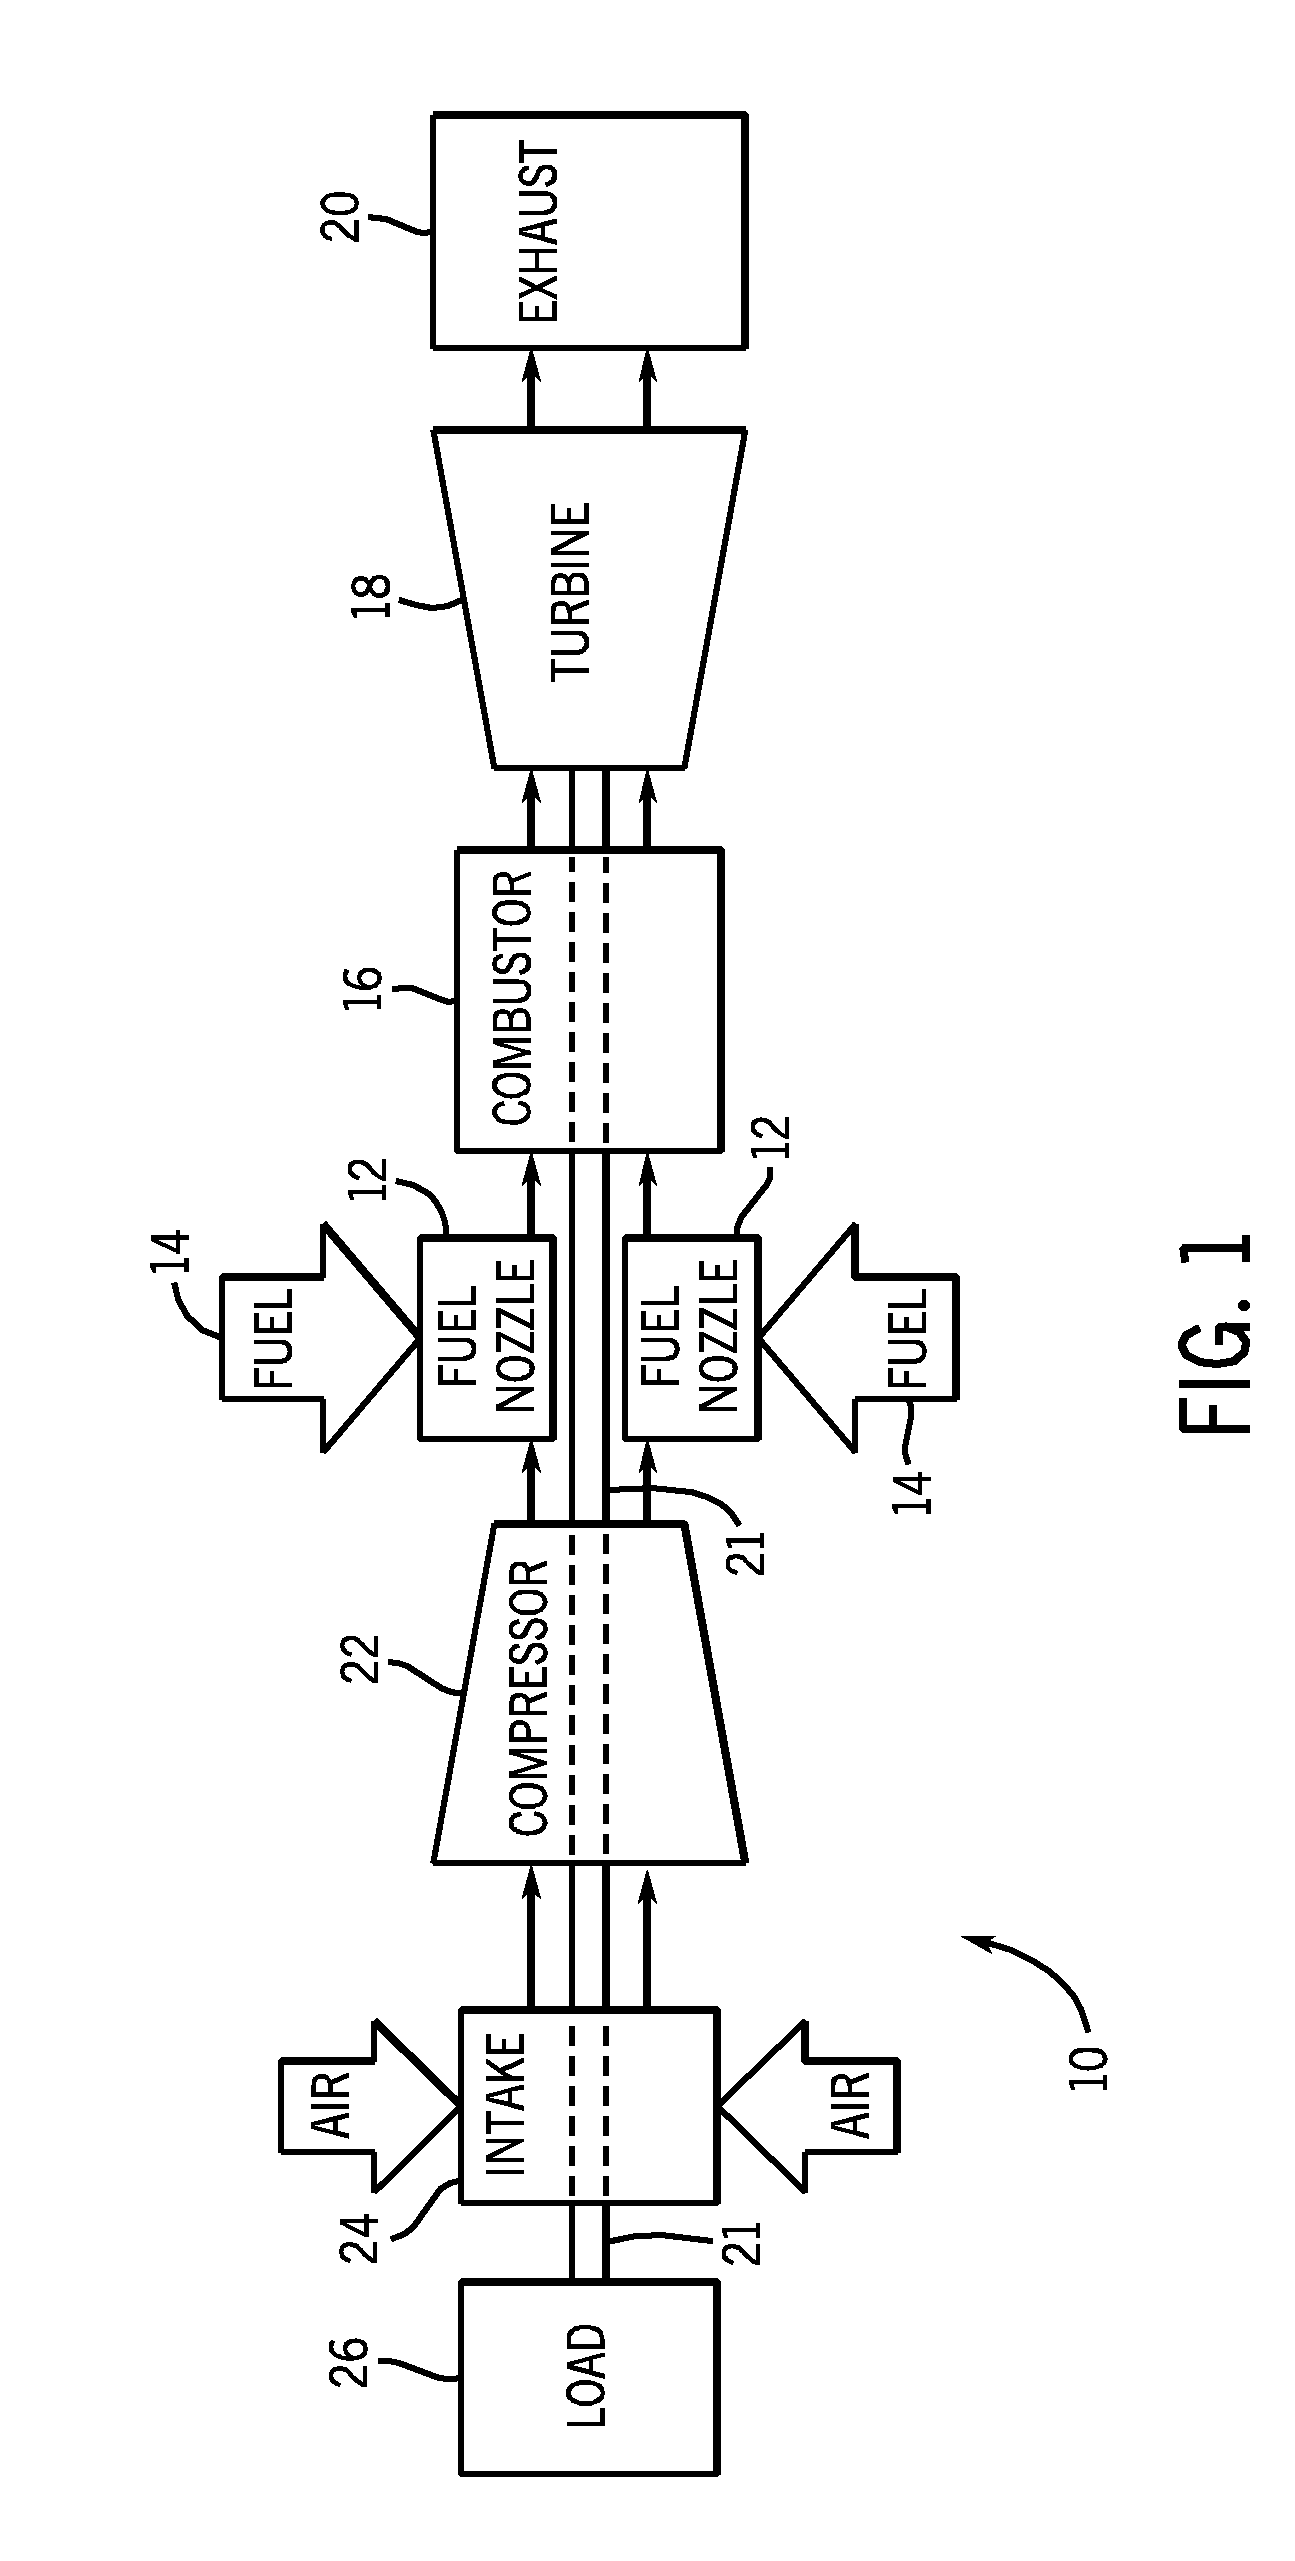 Method and apparatus for fuel injection in a turbine engine